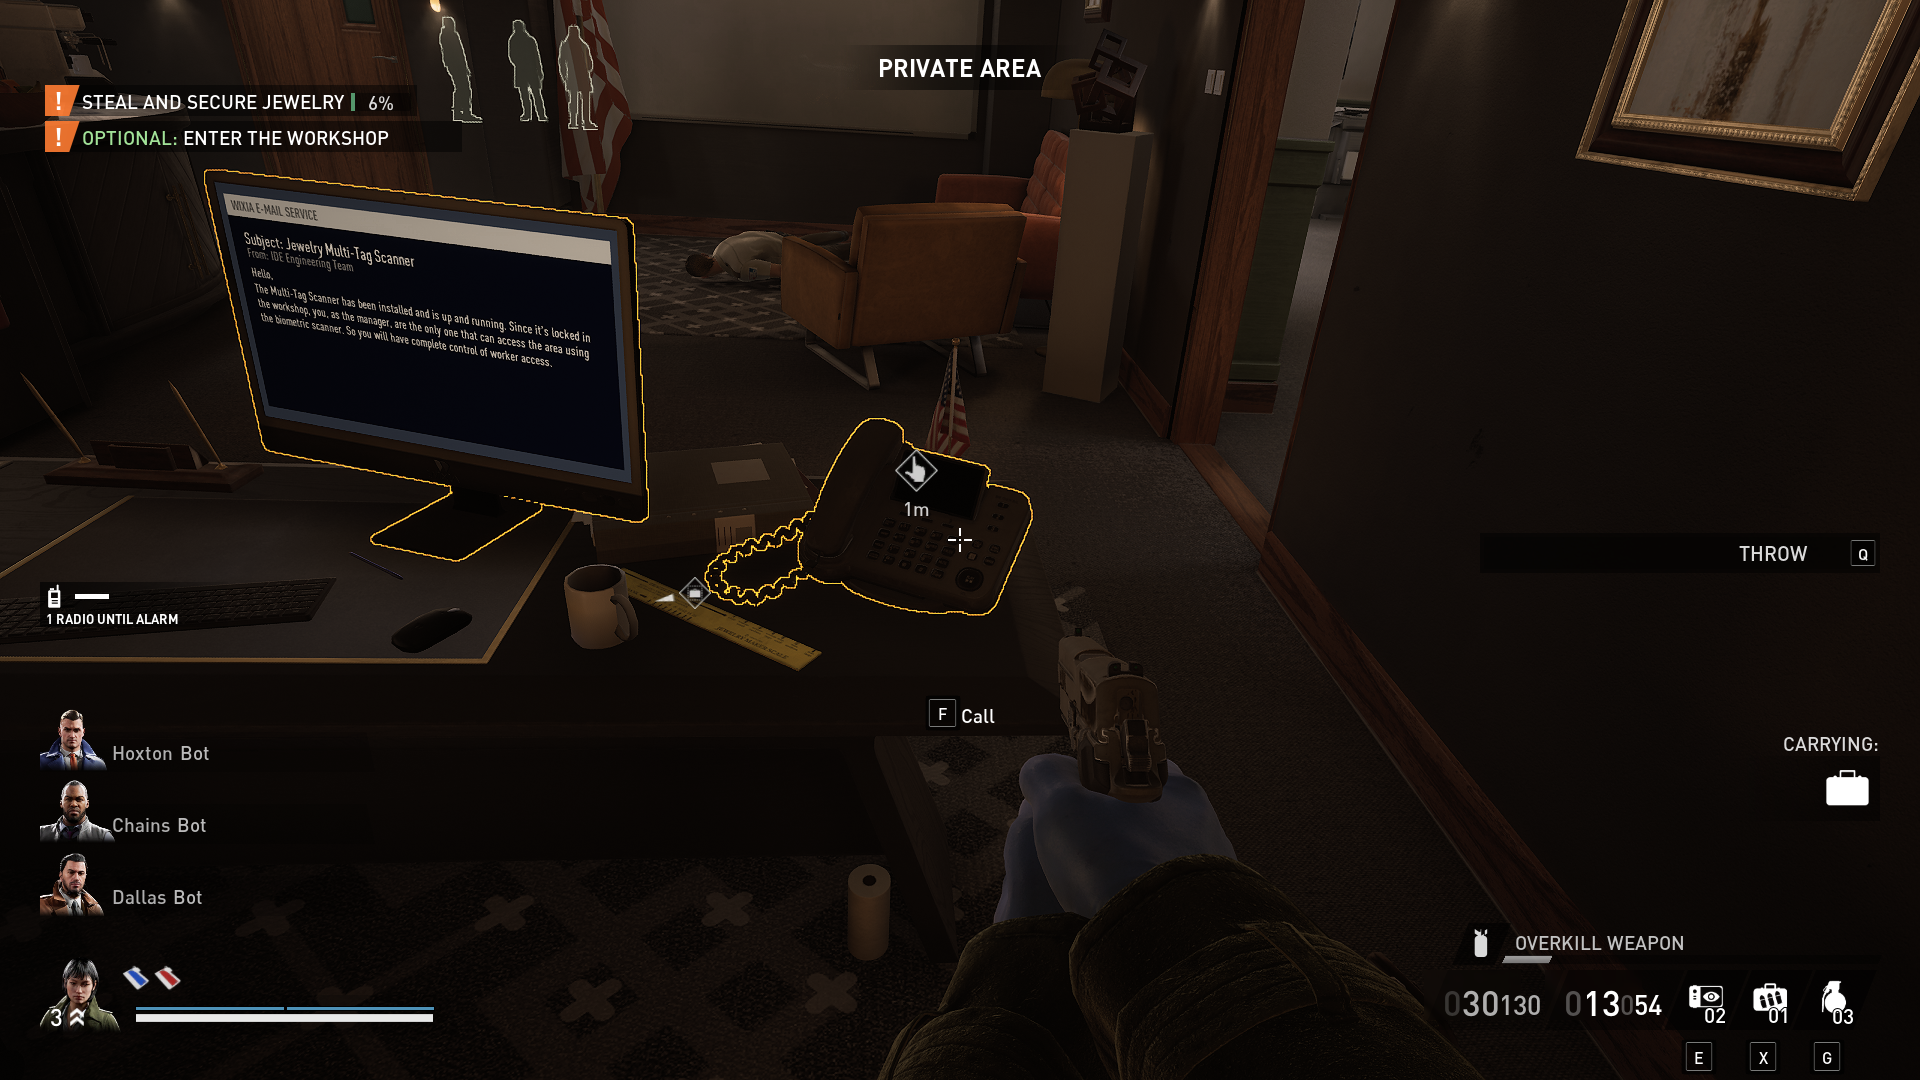 Displays the phone in the manager's office during Dirty Ice (Payday 3)